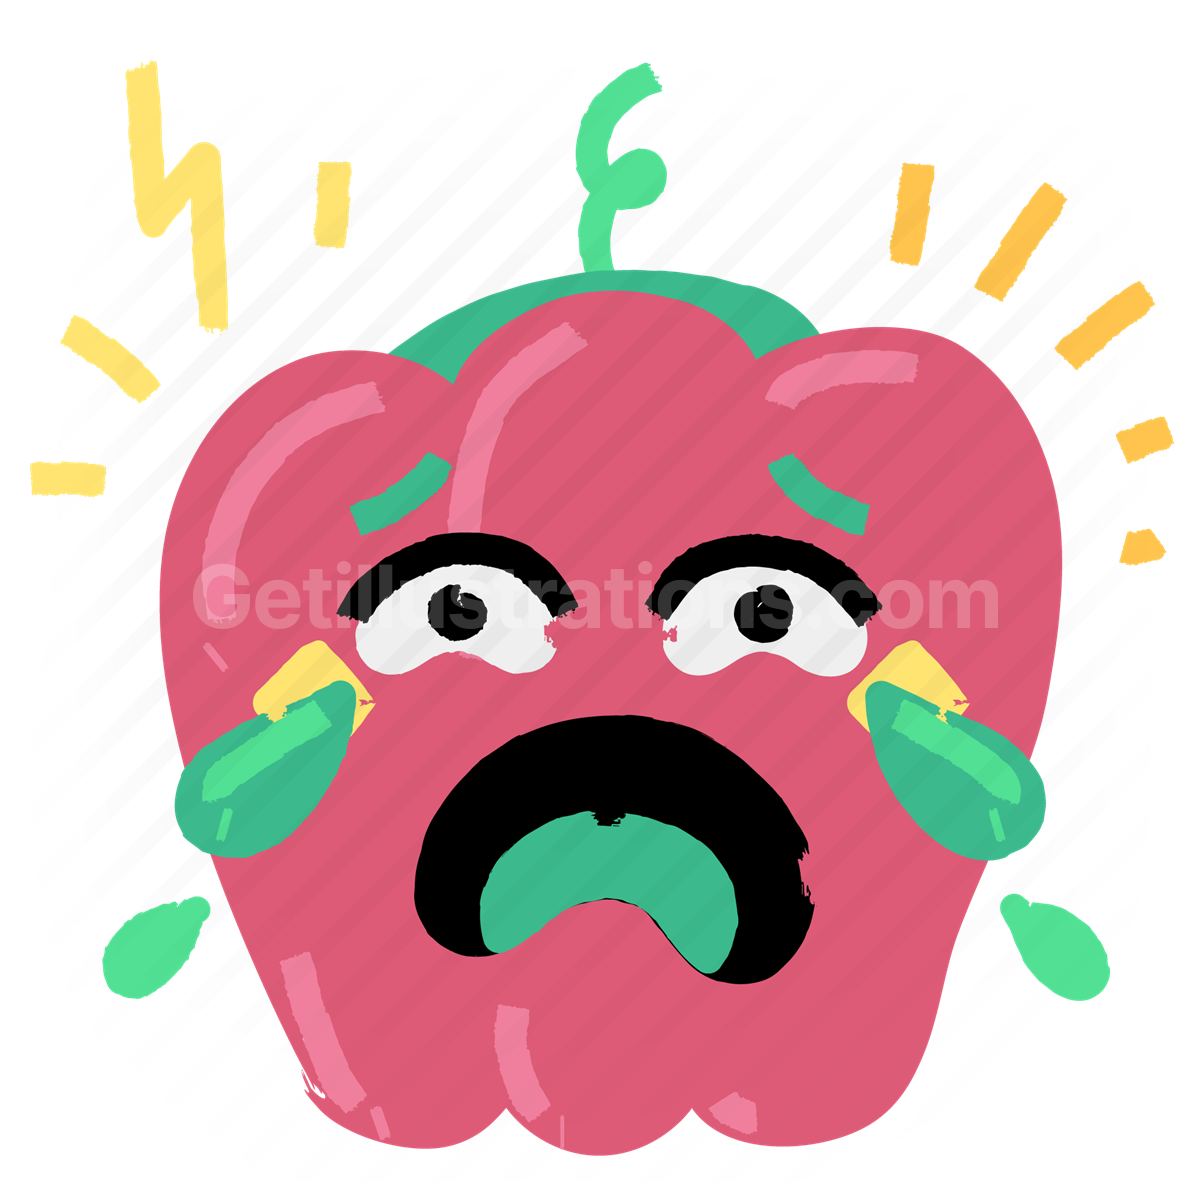 cry, crying, pepper, bell pepper, vegetable, sticker, character